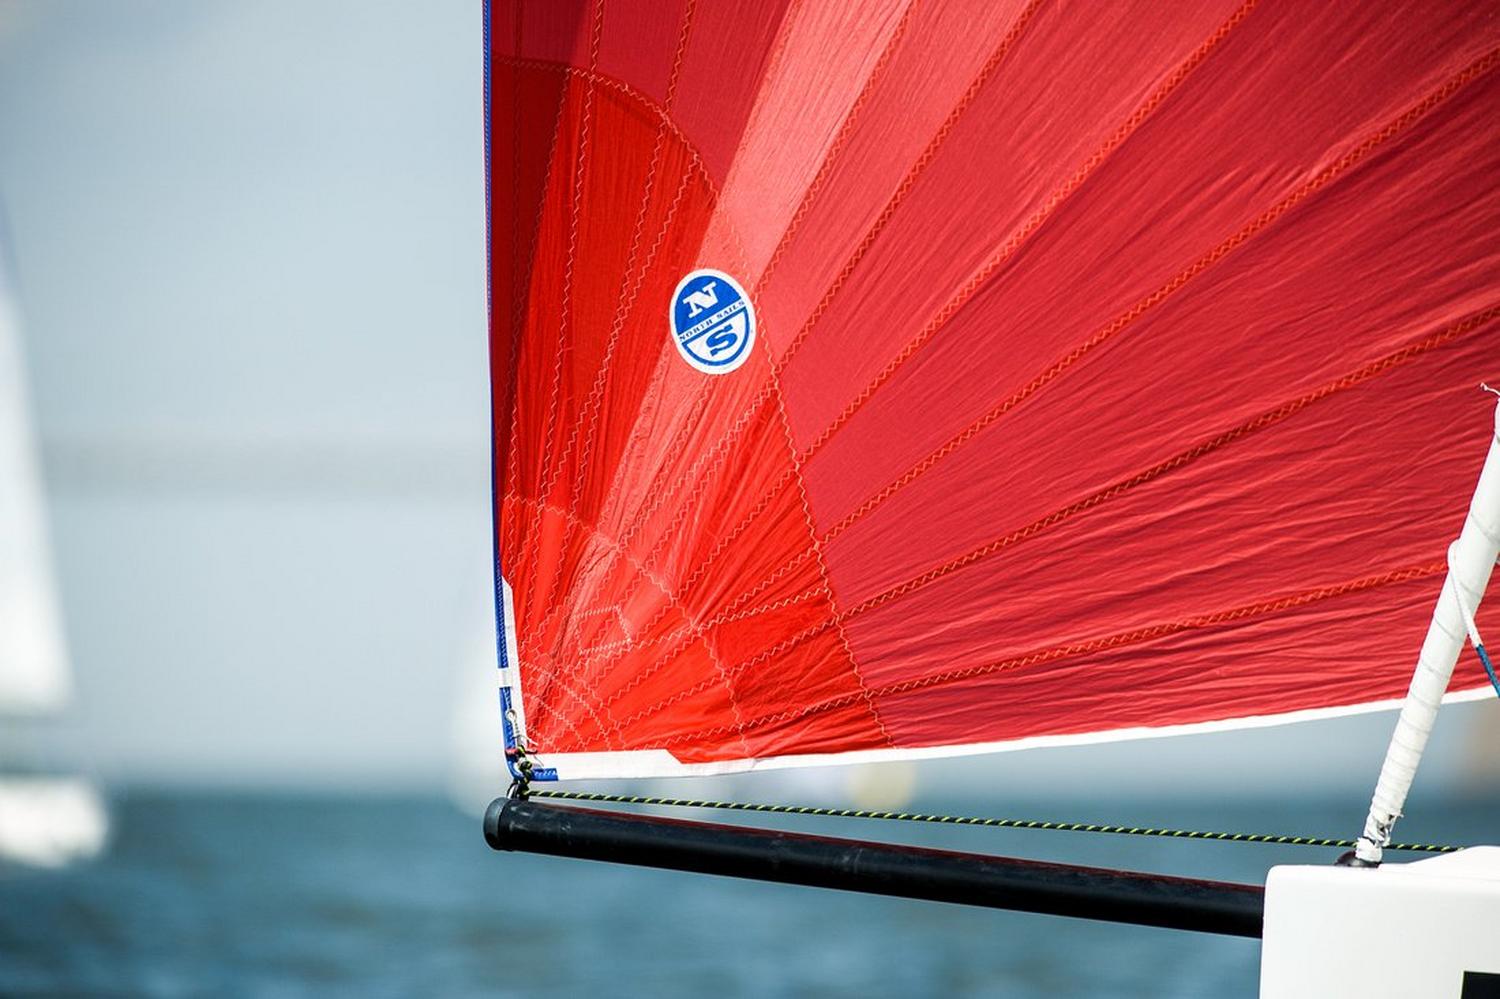 WHAT IT TAKES TO WIN THE J24 WORLDS